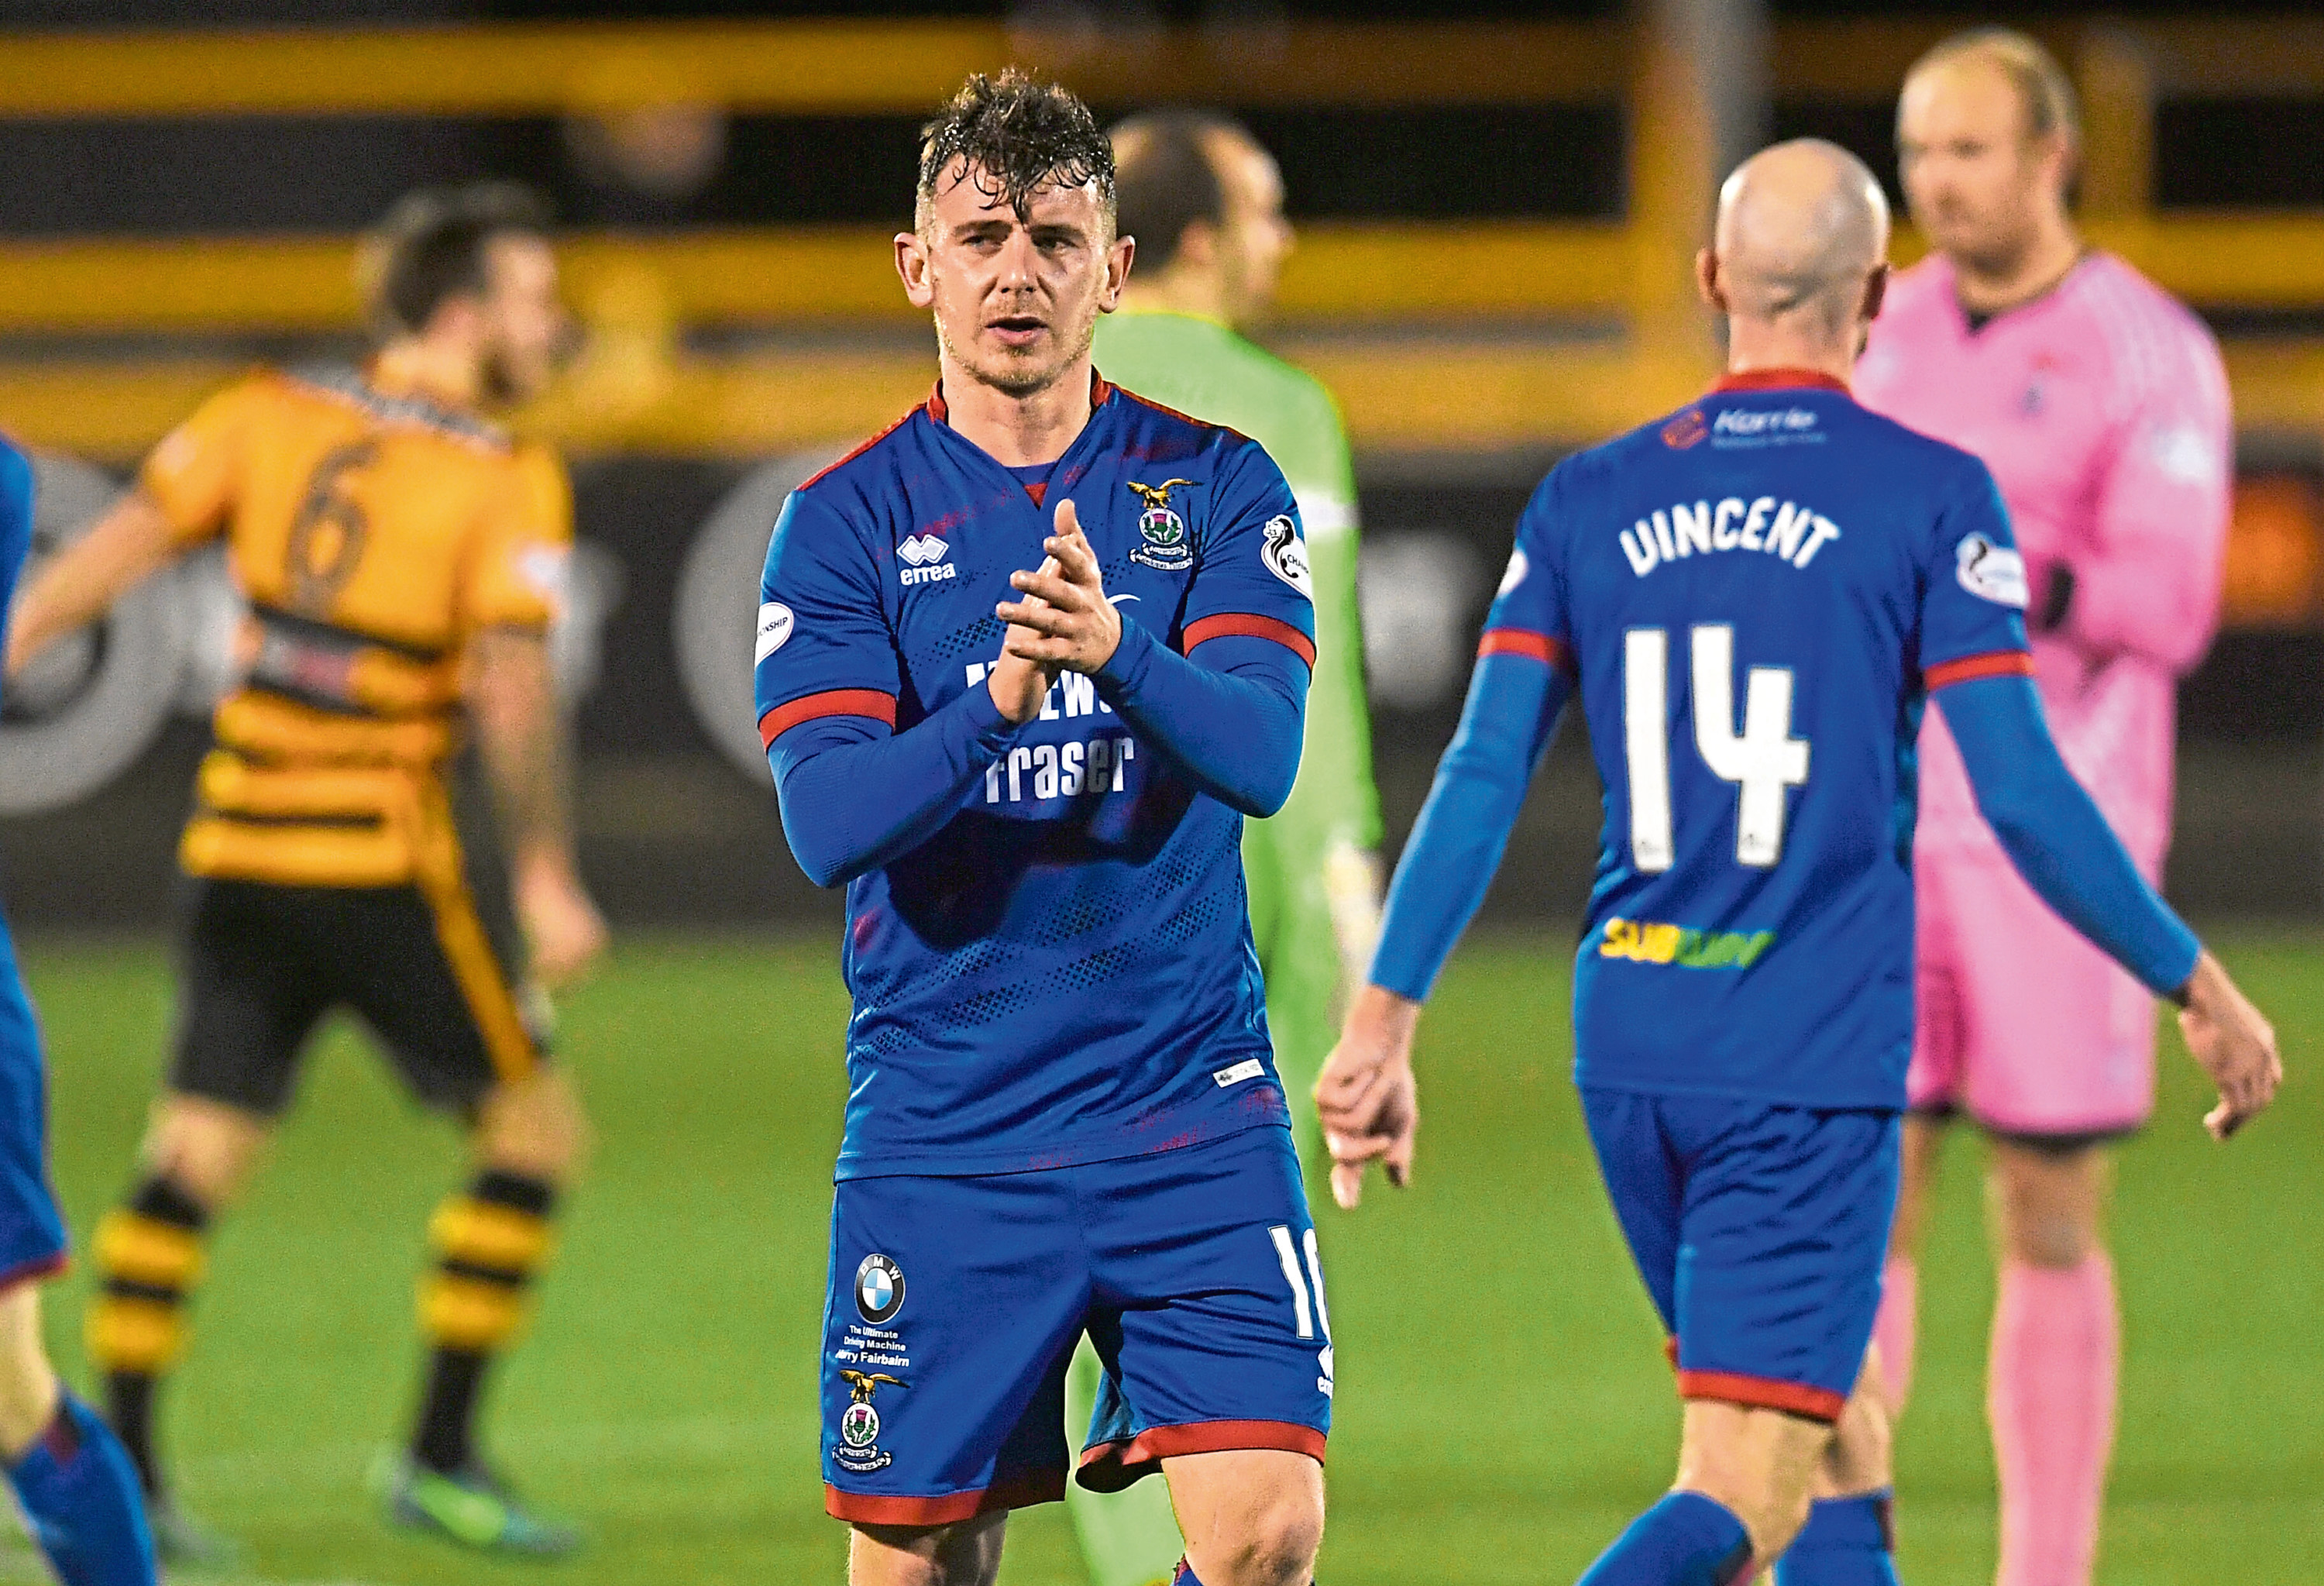 Aaron Doran has been at Caley Thistle for 10 years